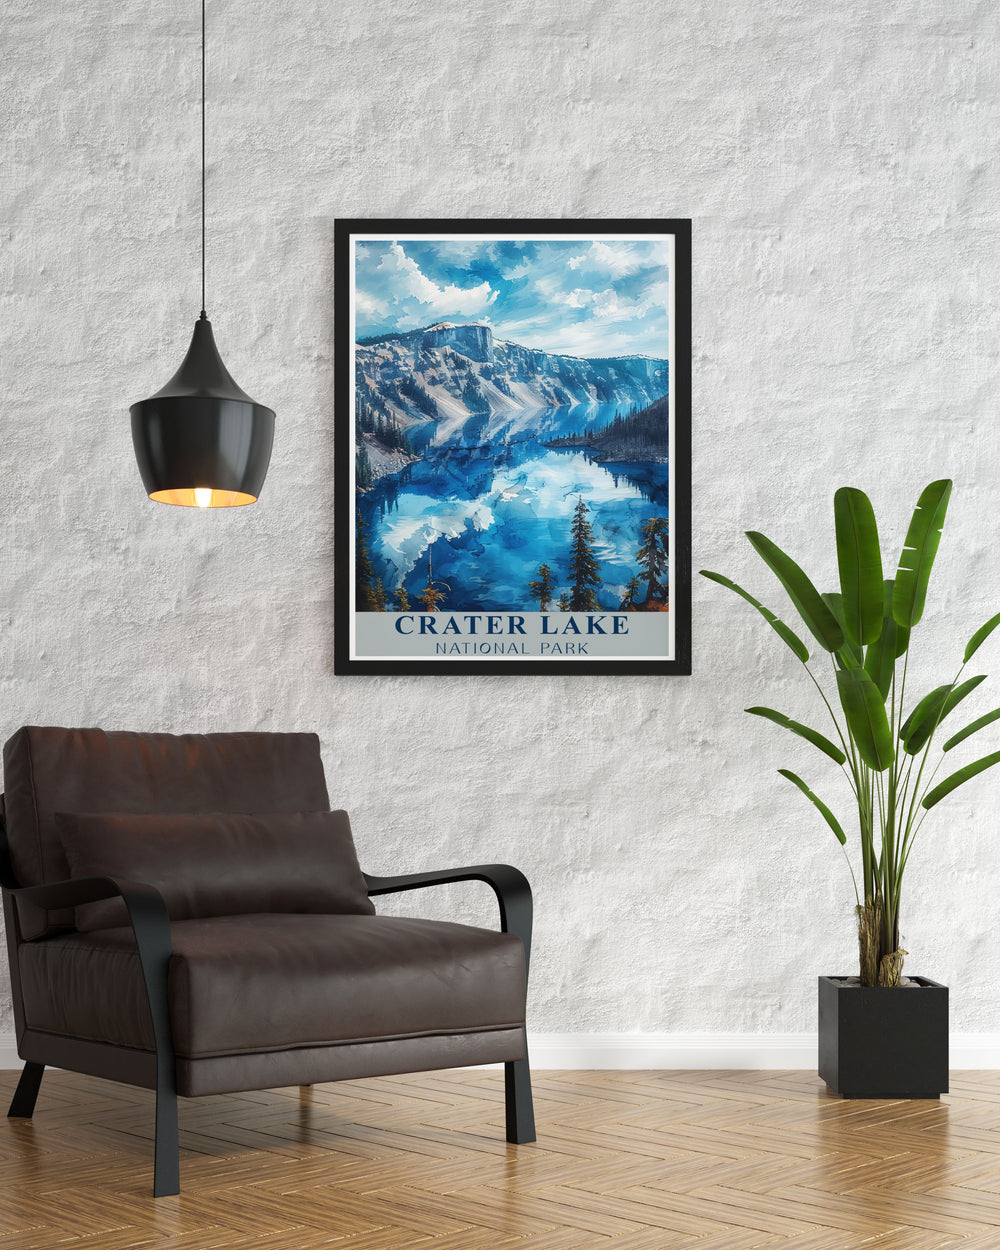 Exquisite National Park Art featuring Crater Lake and its dramatic caldera. These vibrant prints bring the natural beauty of Crater Lake into your home. Ideal for enhancing your living room or office with unique and captivating wall art.